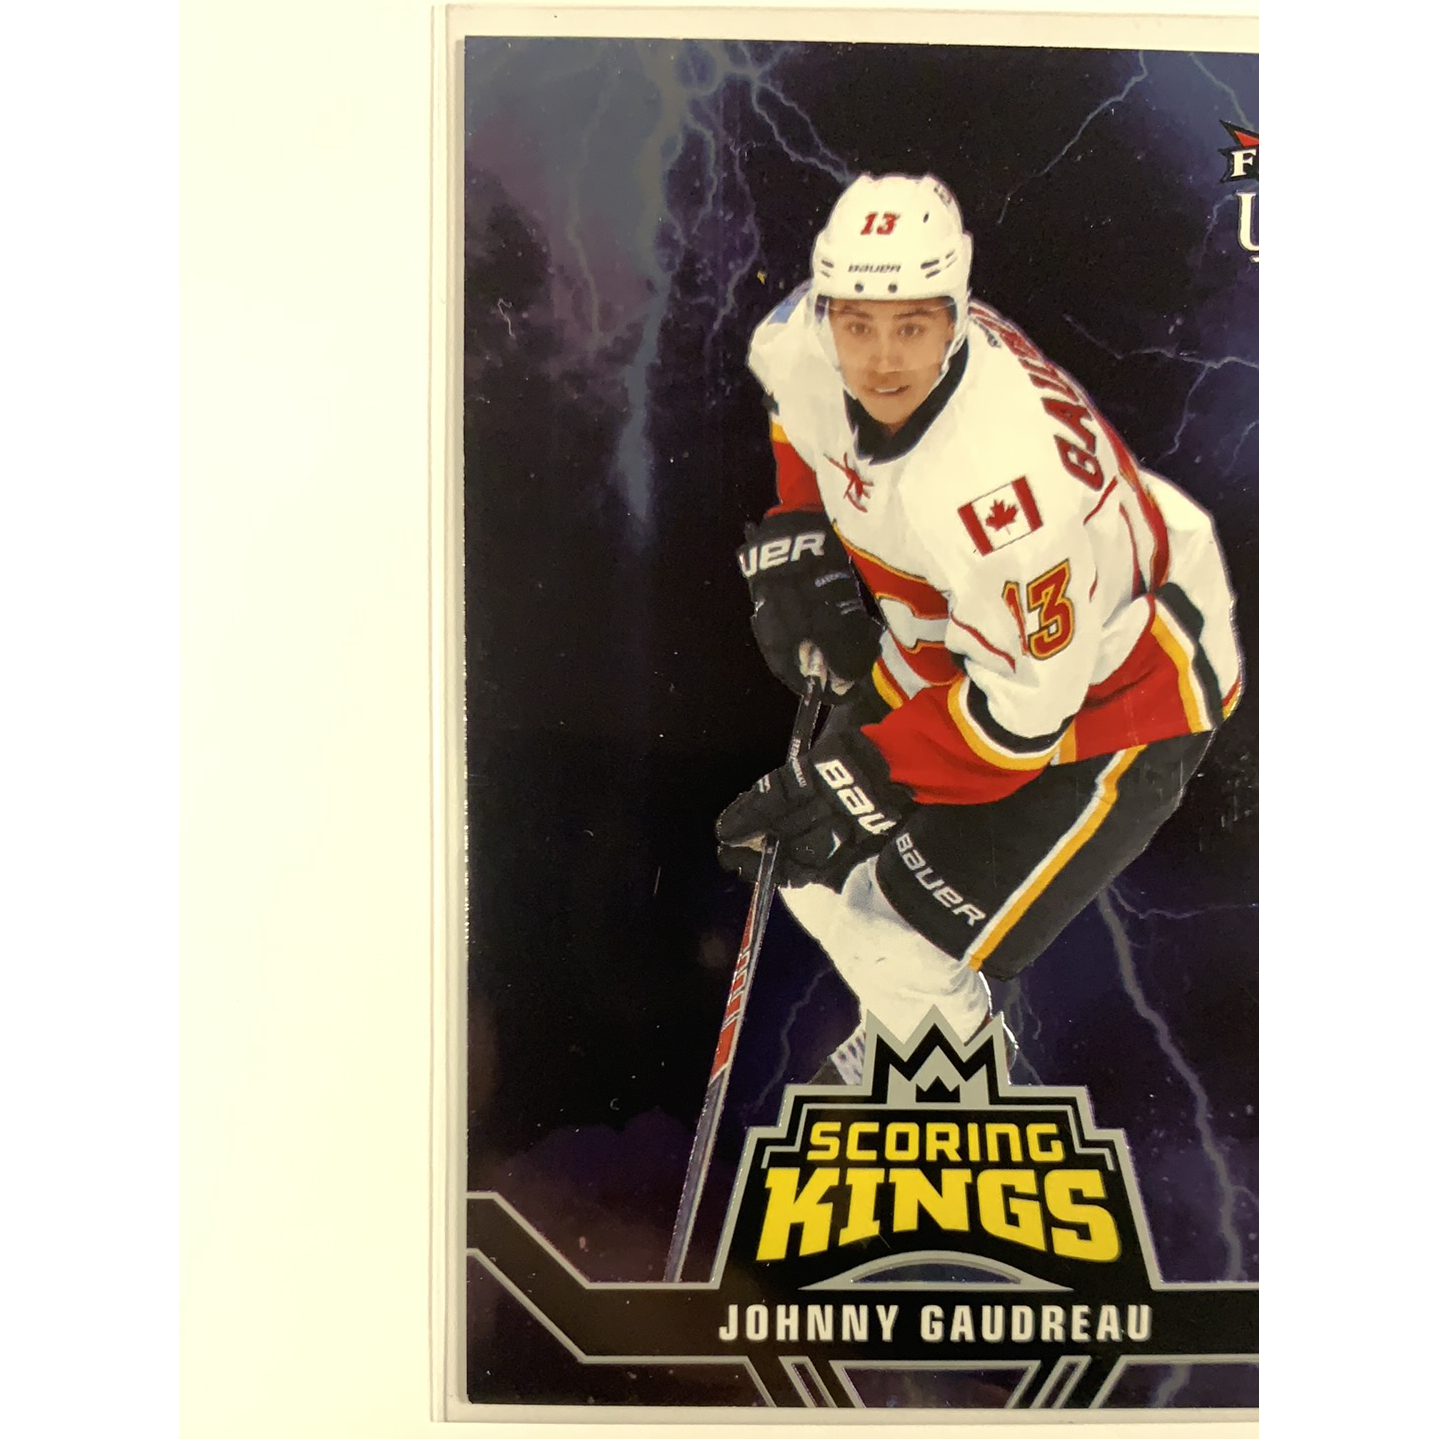  2016-17 Fleer Johnny Gaudreau Scoring Kings  Local Legends Cards & Collectibles